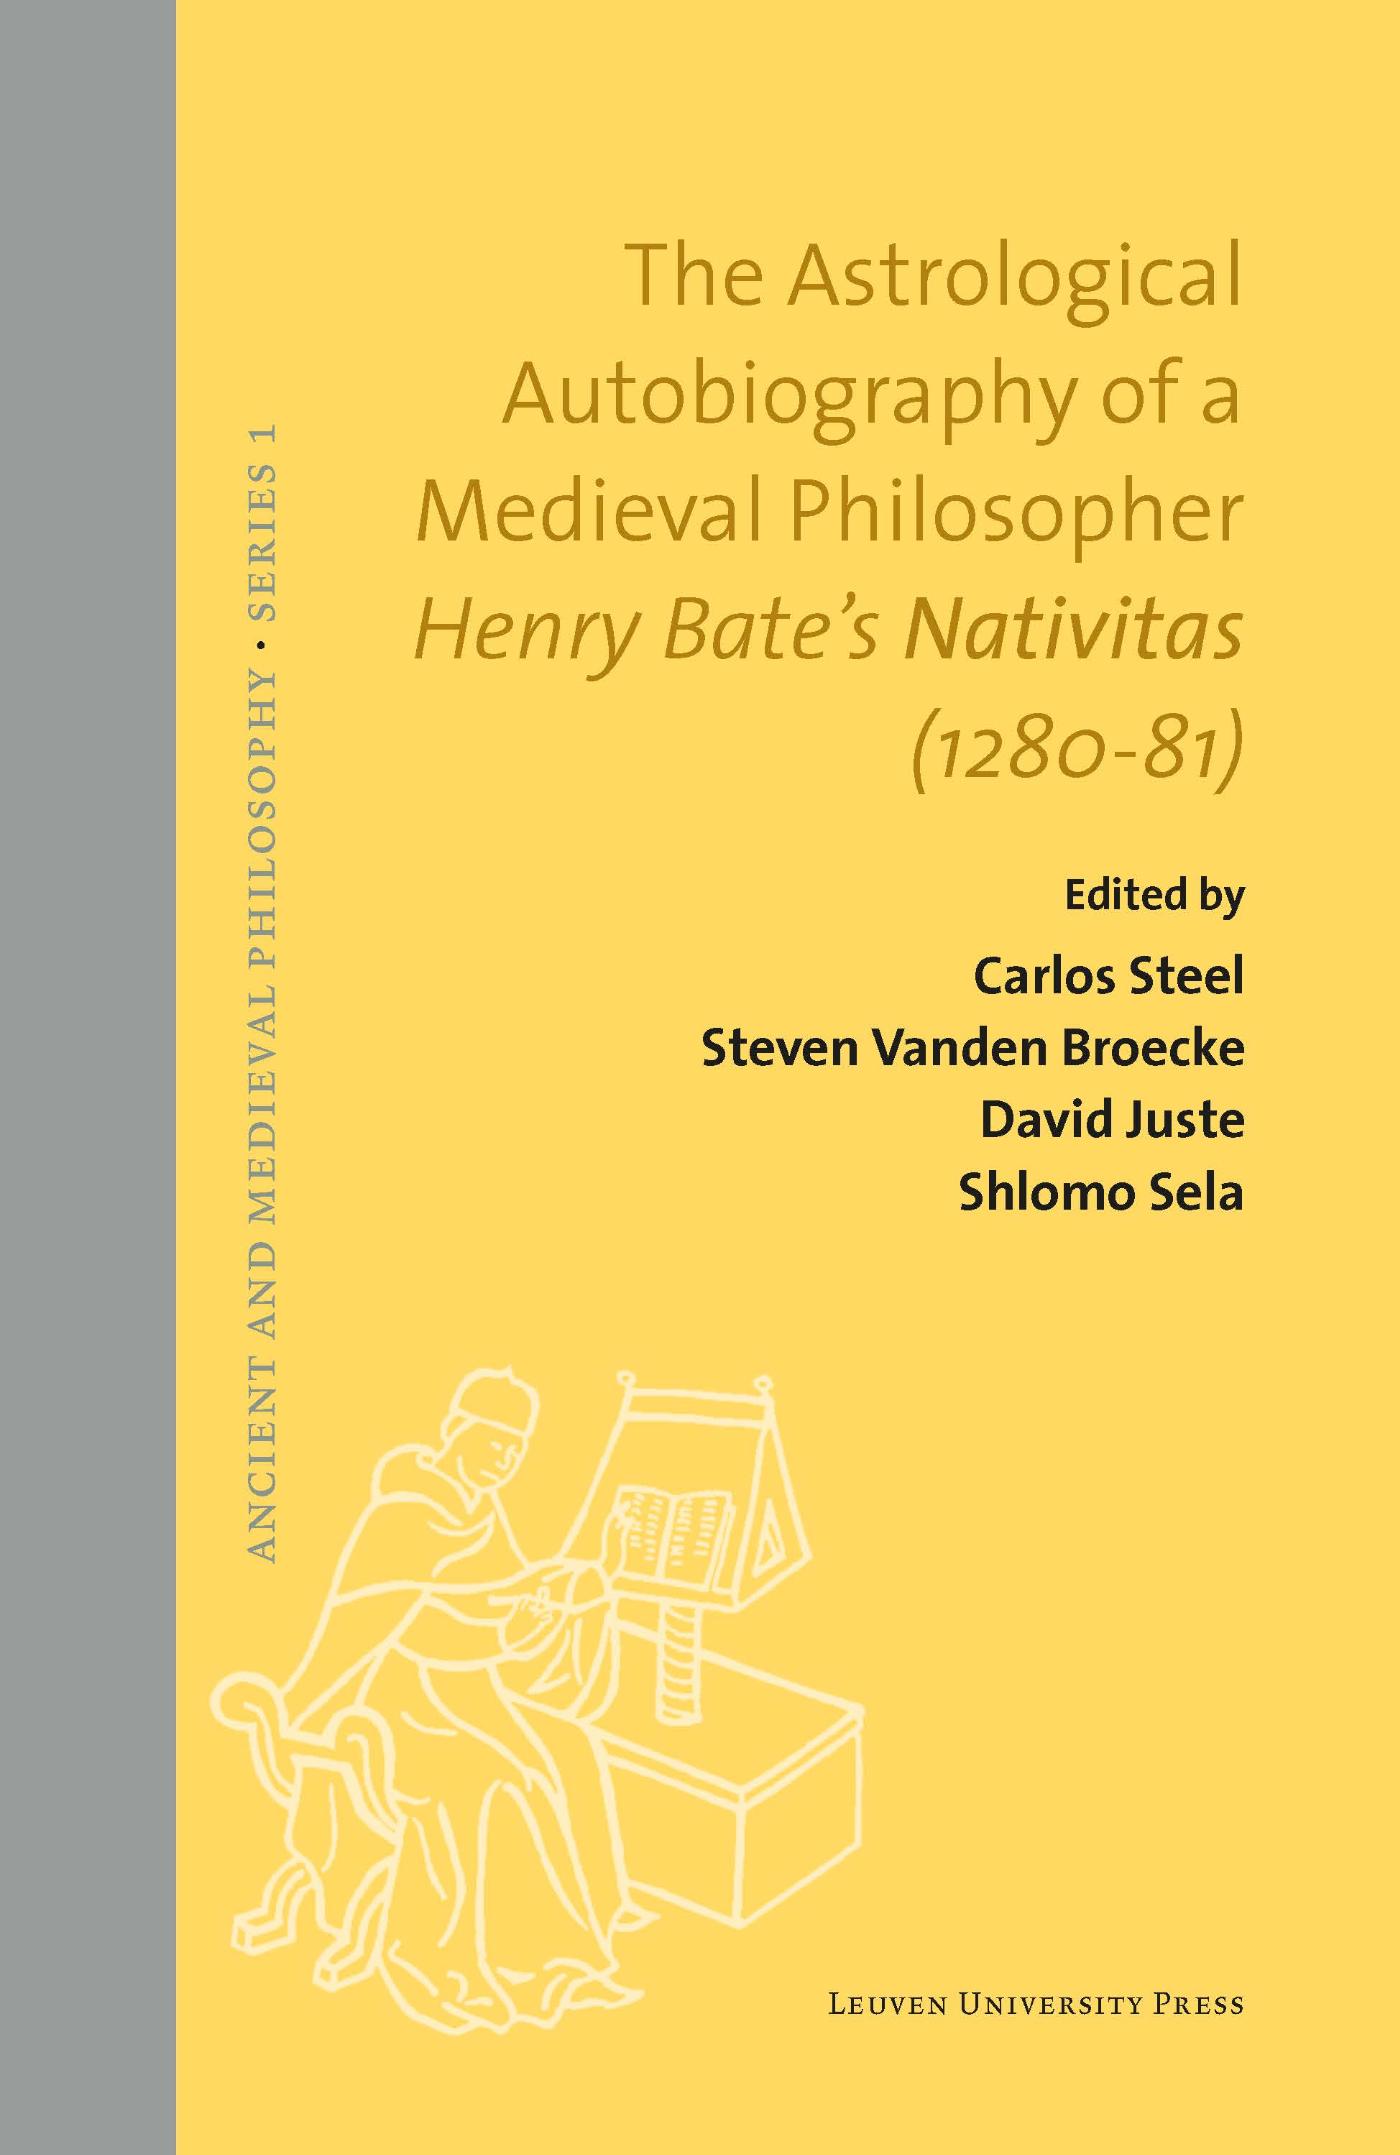 The Astrological Autobiography of a Medieval Philosopher (Ebook)